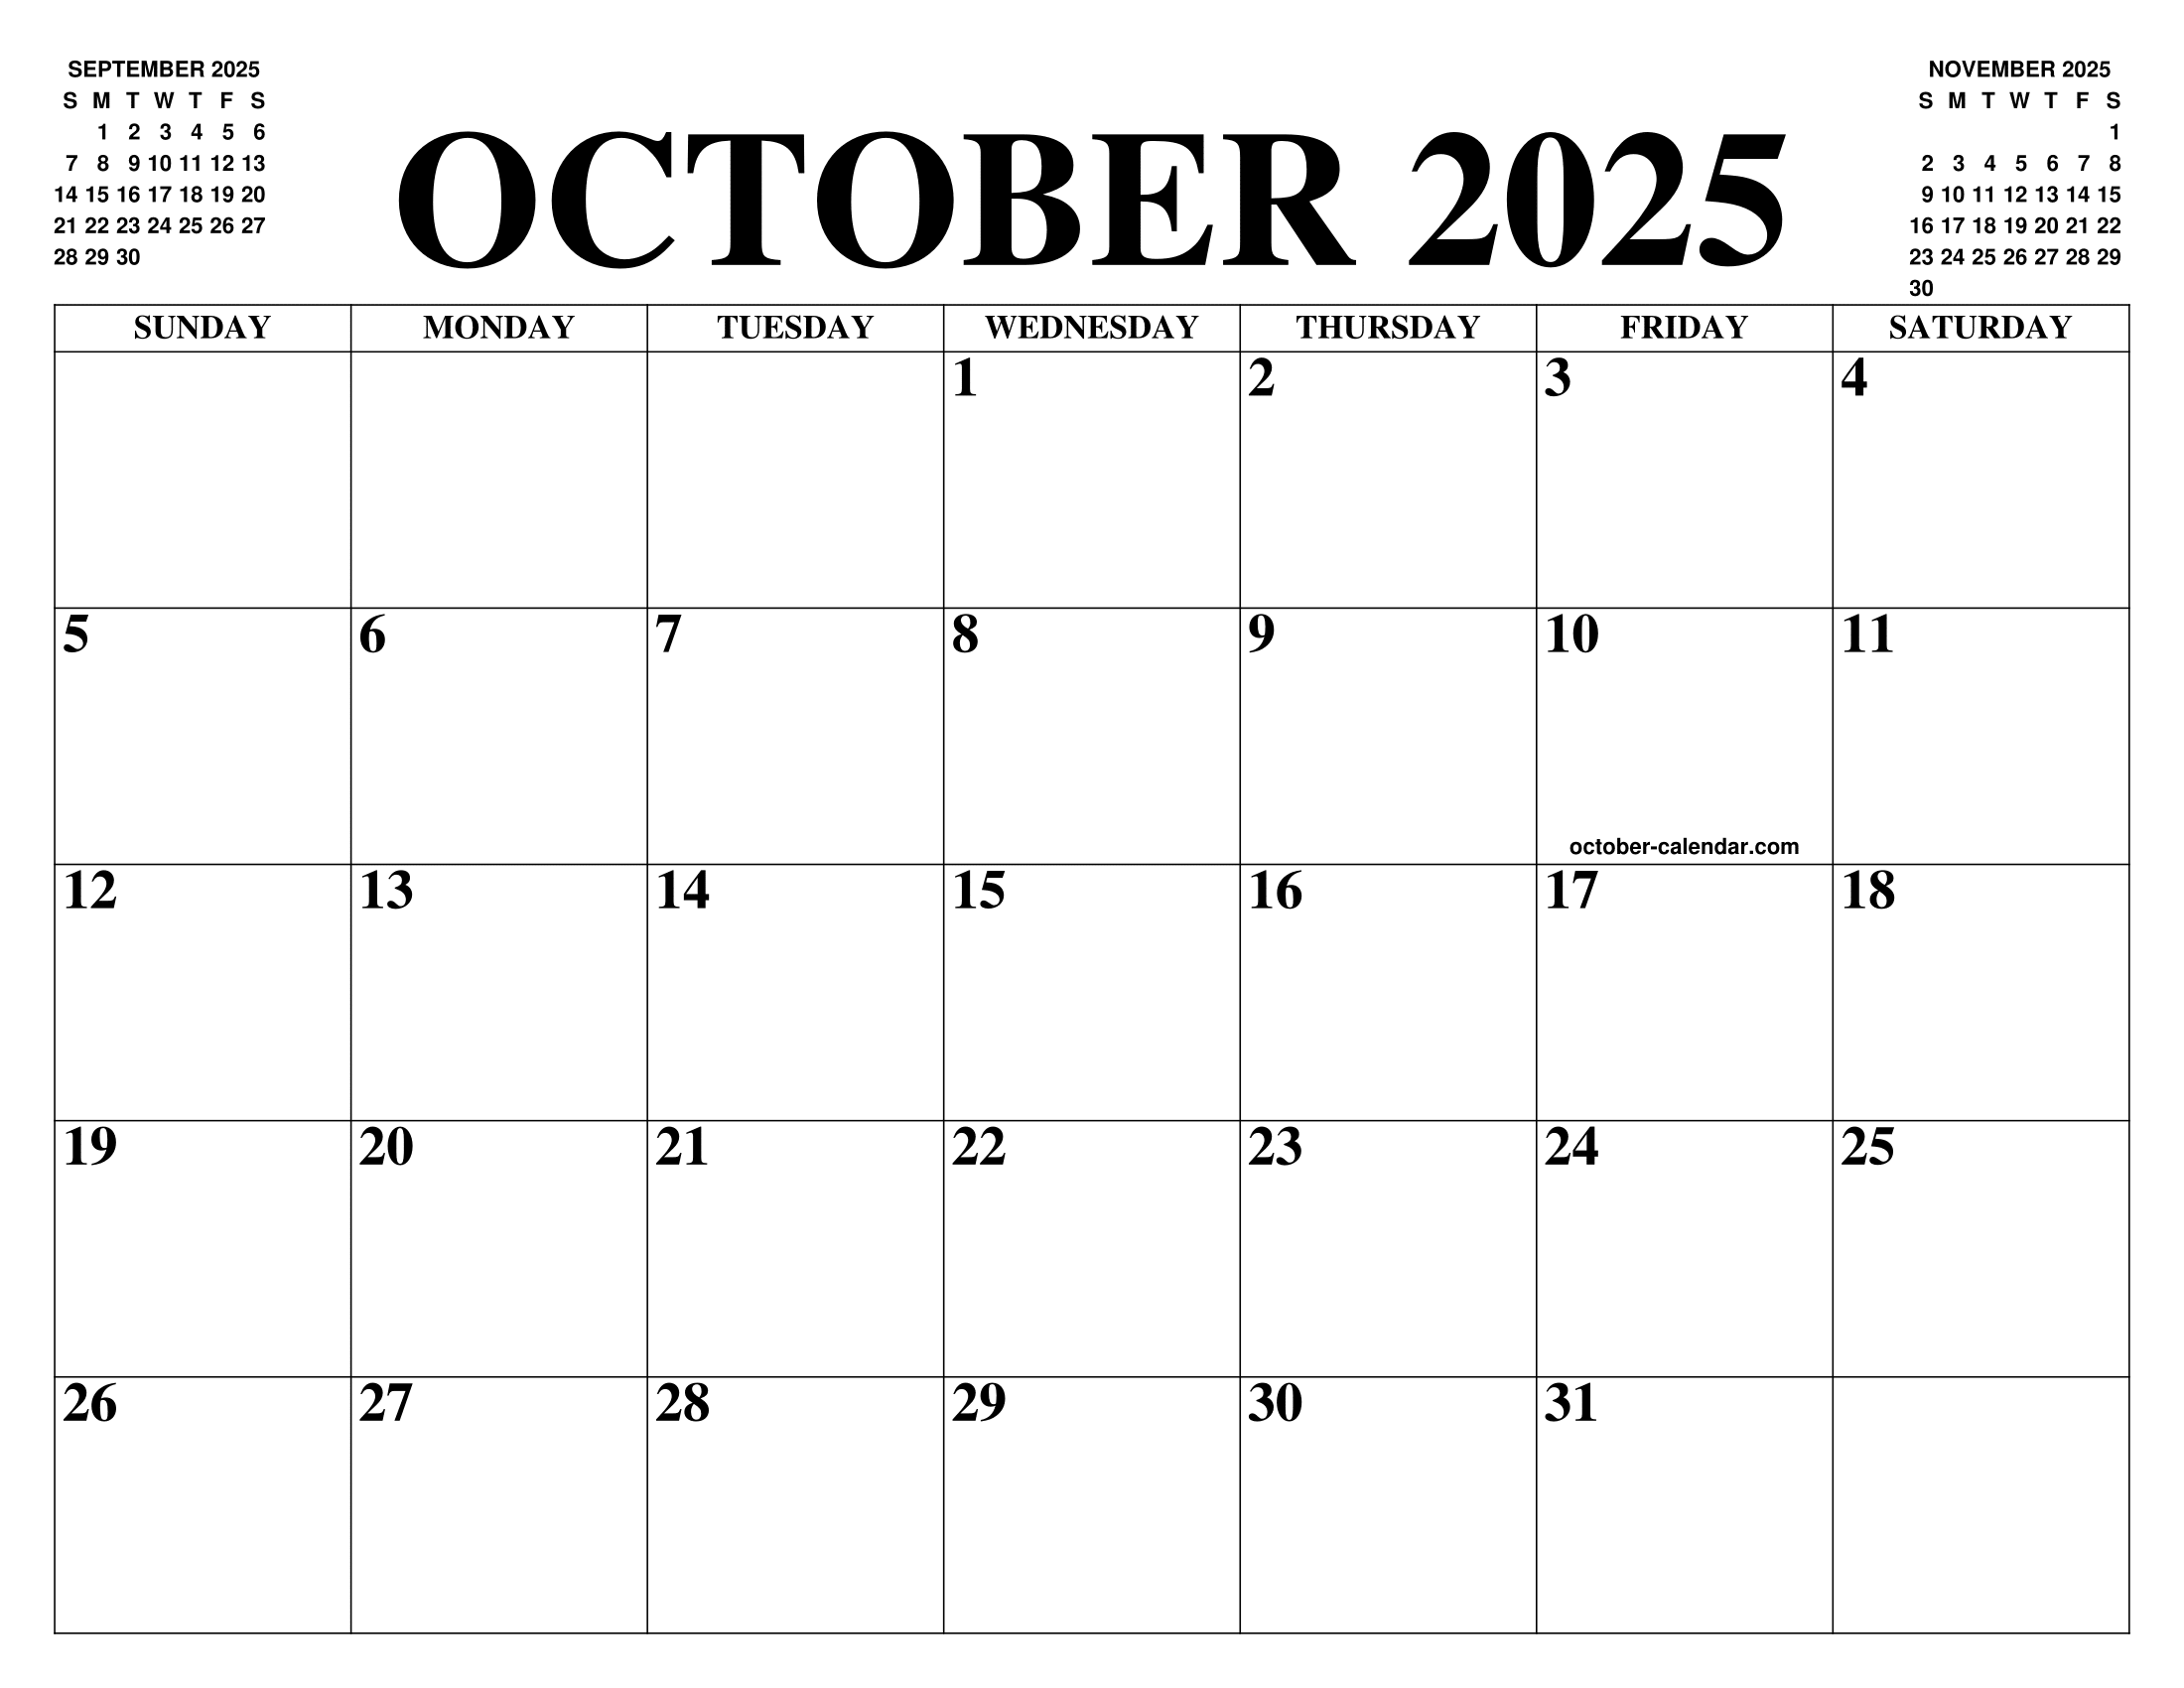 October calendar of the month free printable october calendar of the year